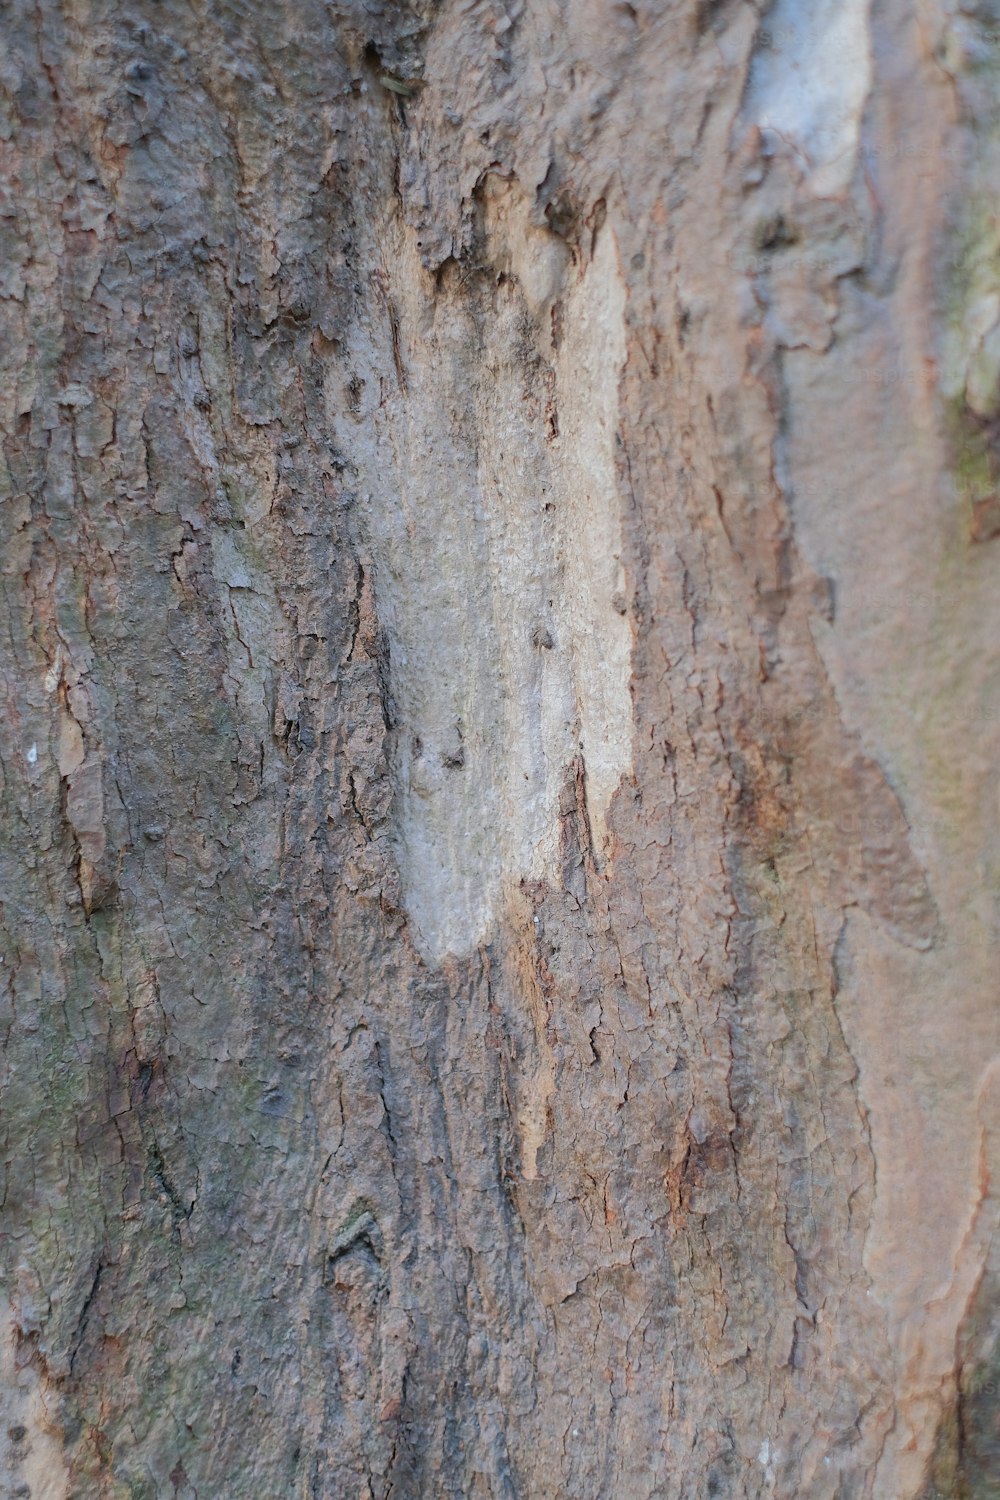 a close up of a tree with a bird on it